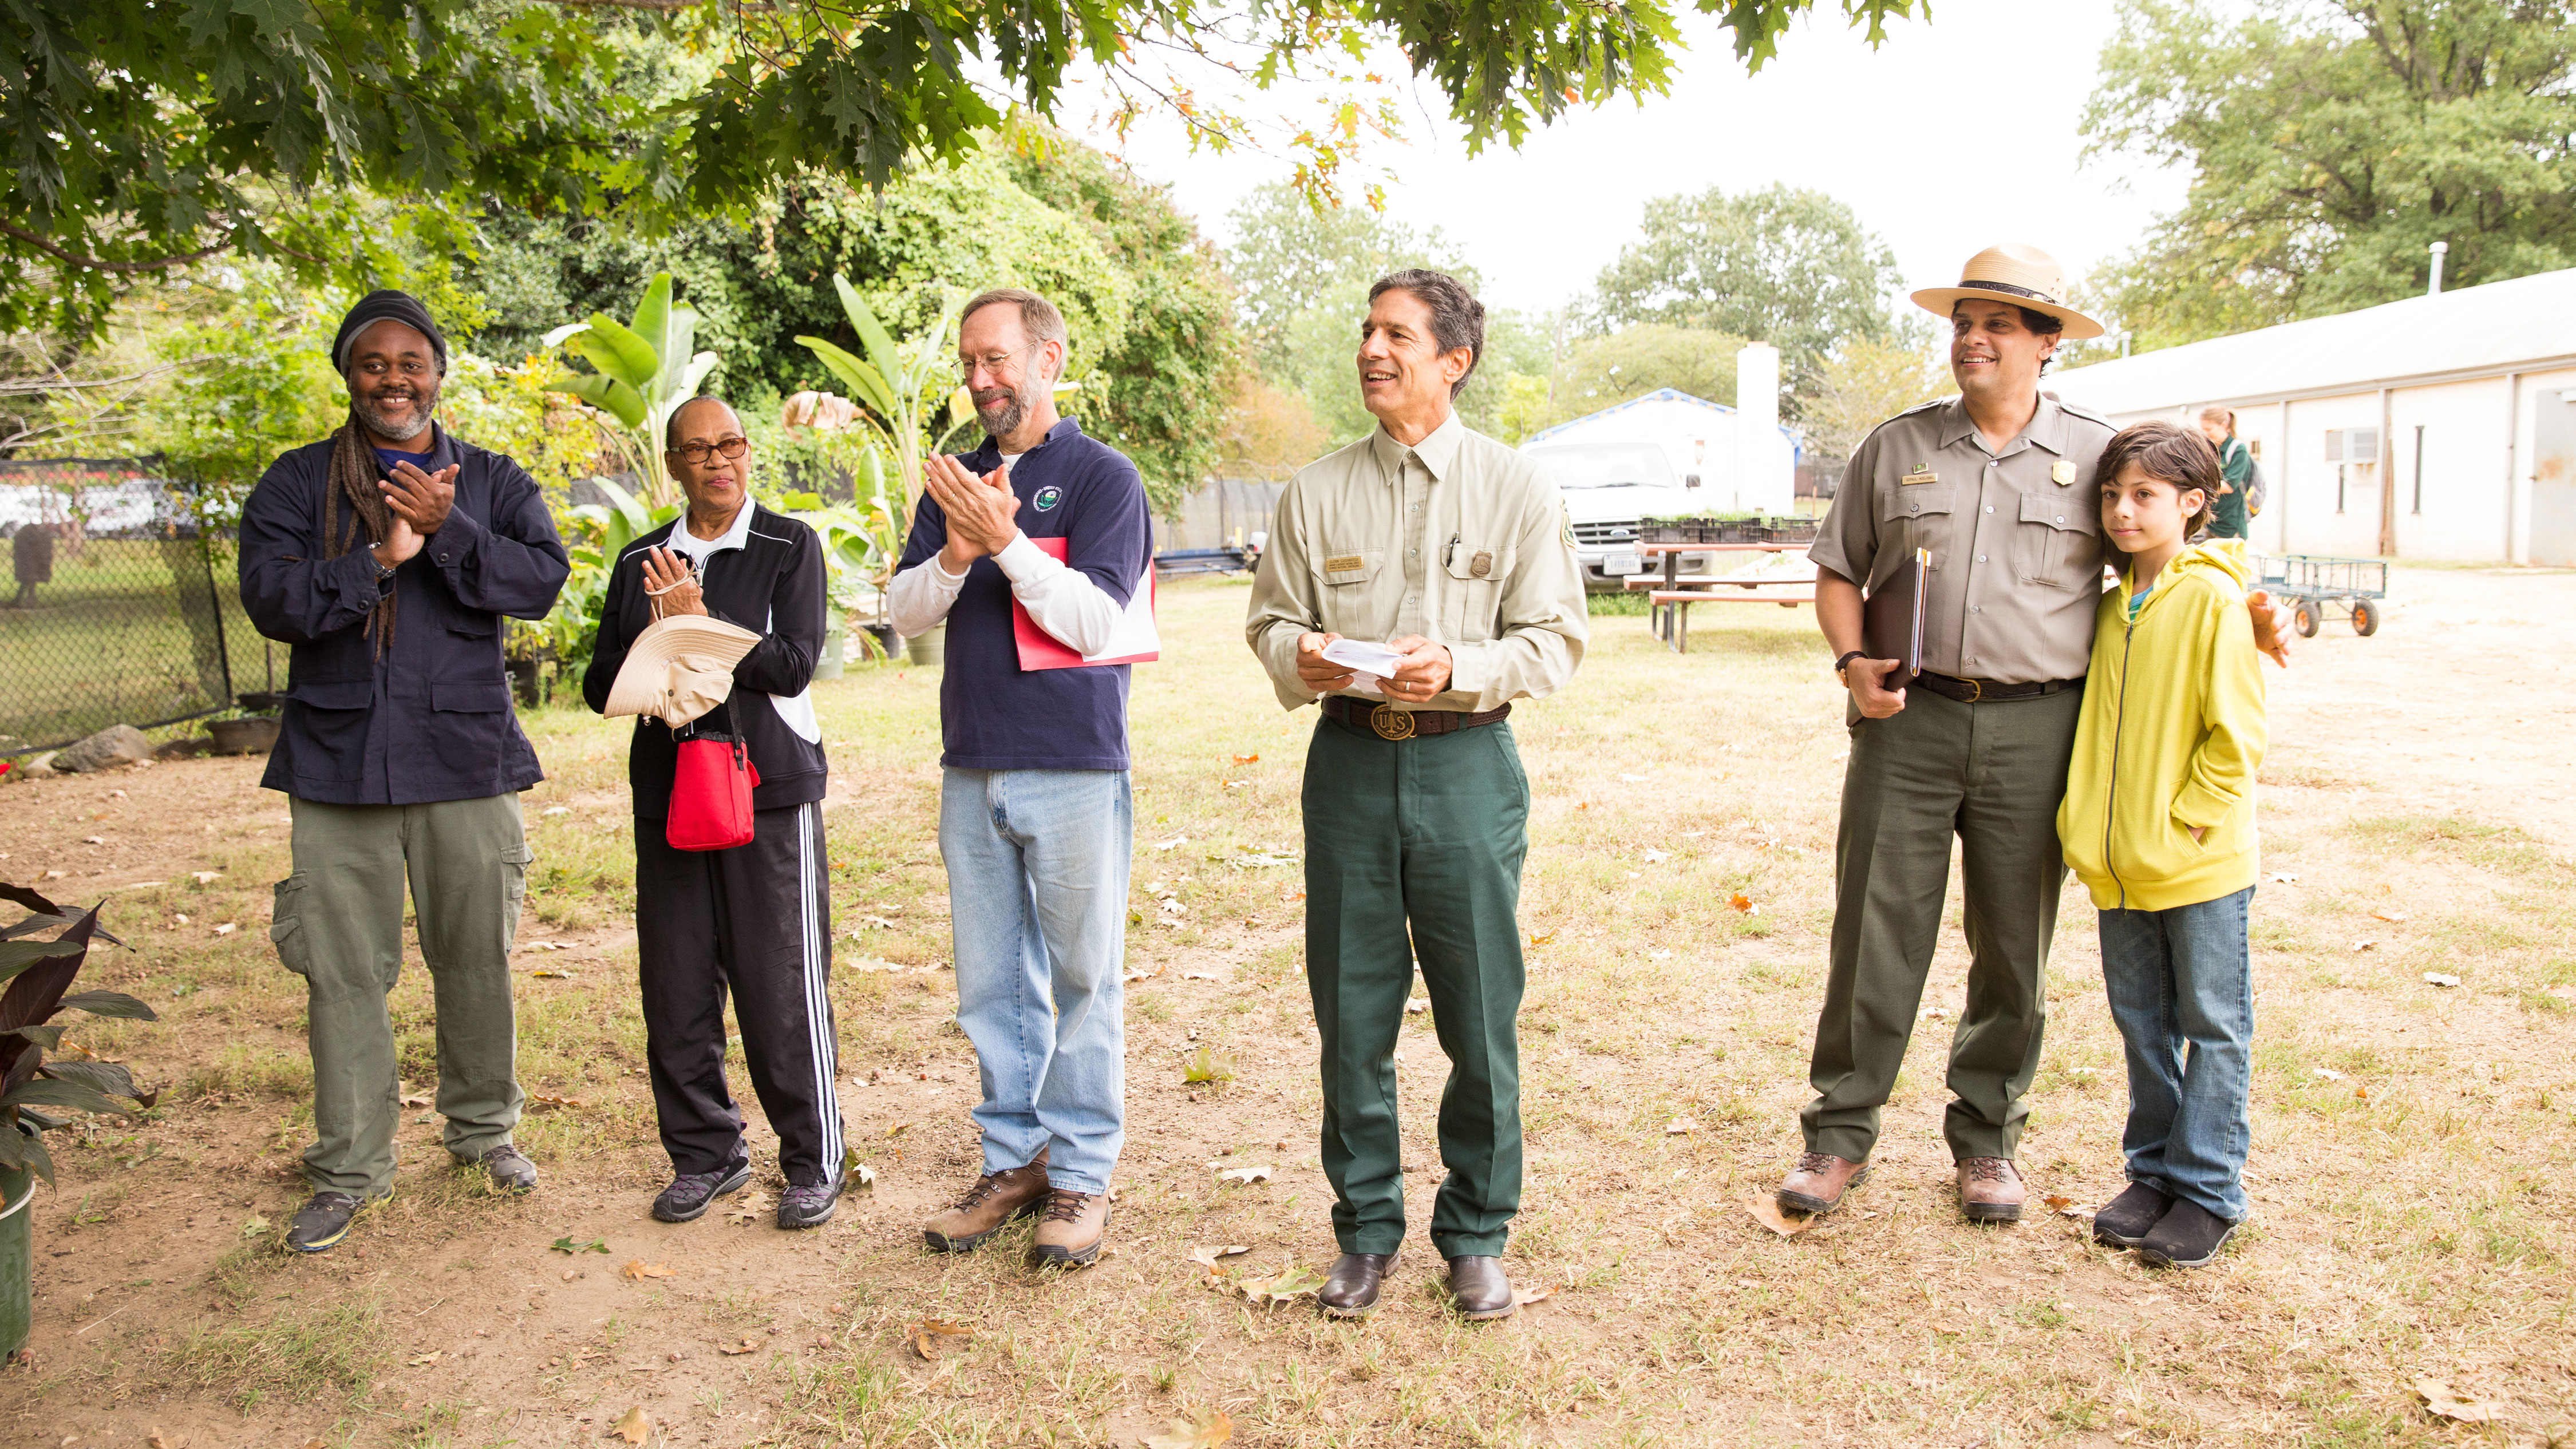 Alan Spears and others at the Kenilworth Aquatic Gardens NPLD Event in 2015